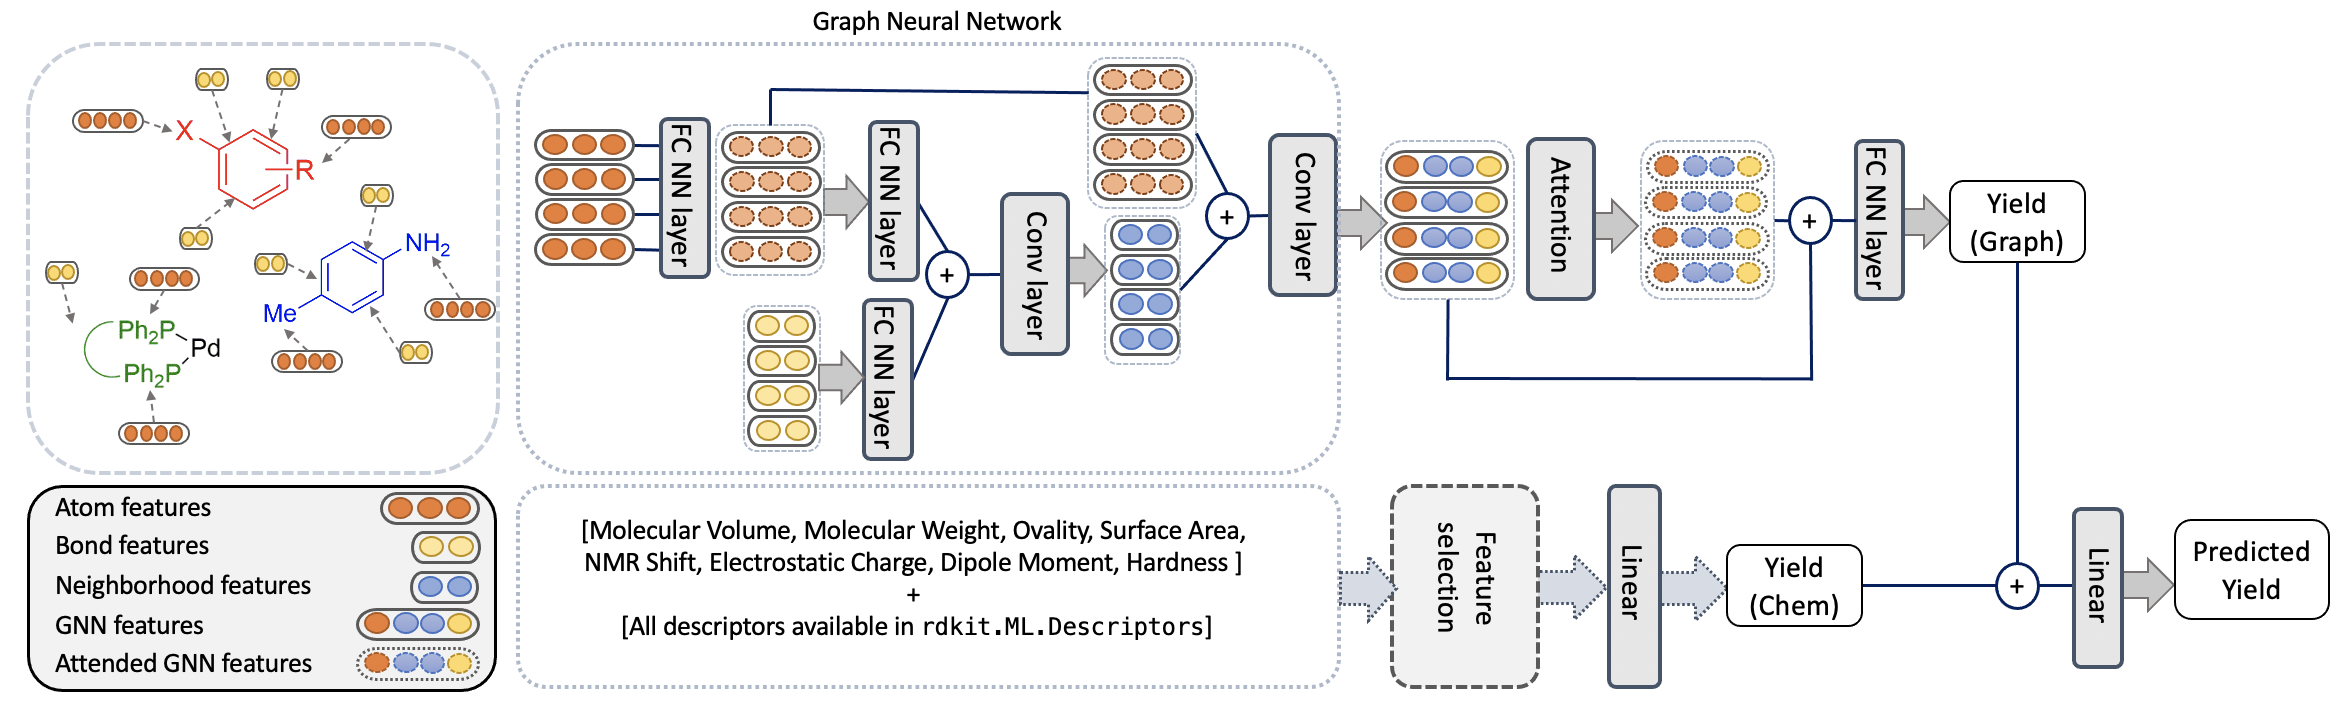 Graph Neural Networks For Predicting Chemical Reaction Performance